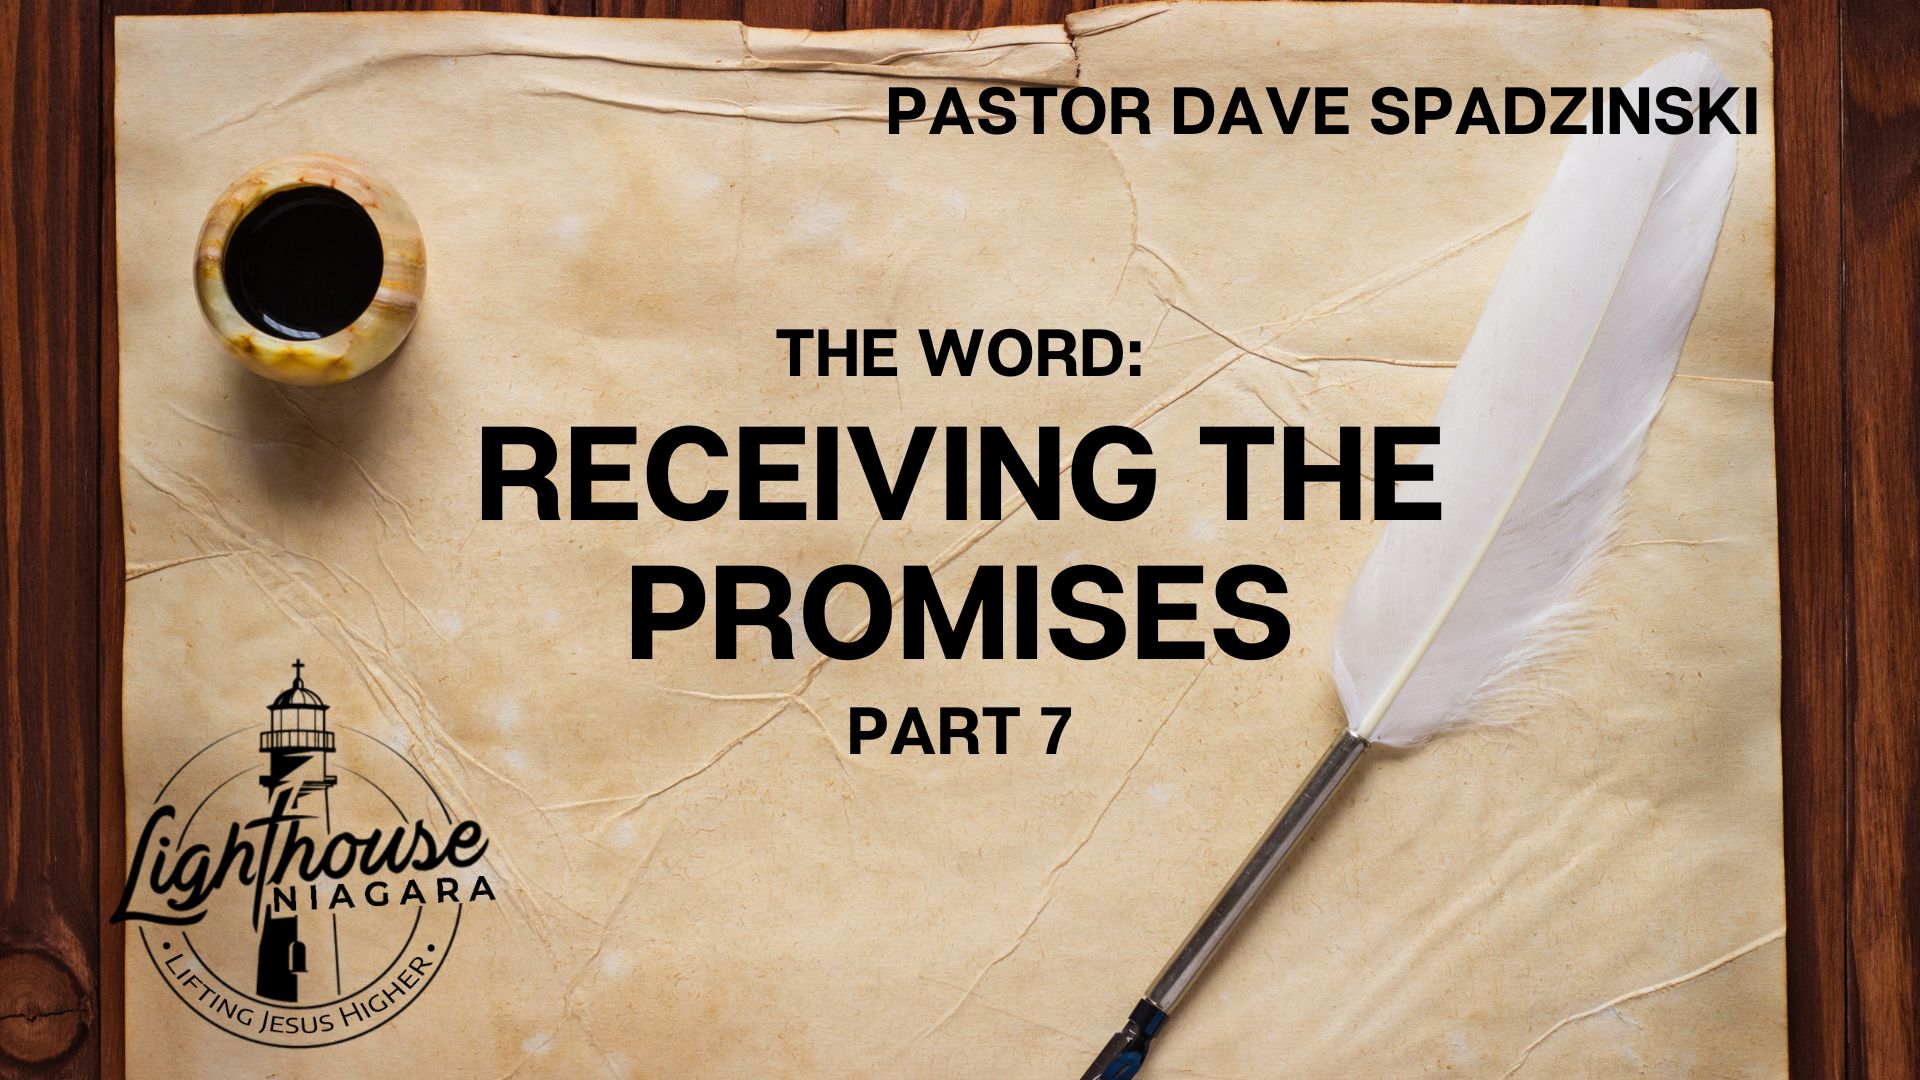 The Word: Receiving The Promises - Pastor Dave Spadzinski